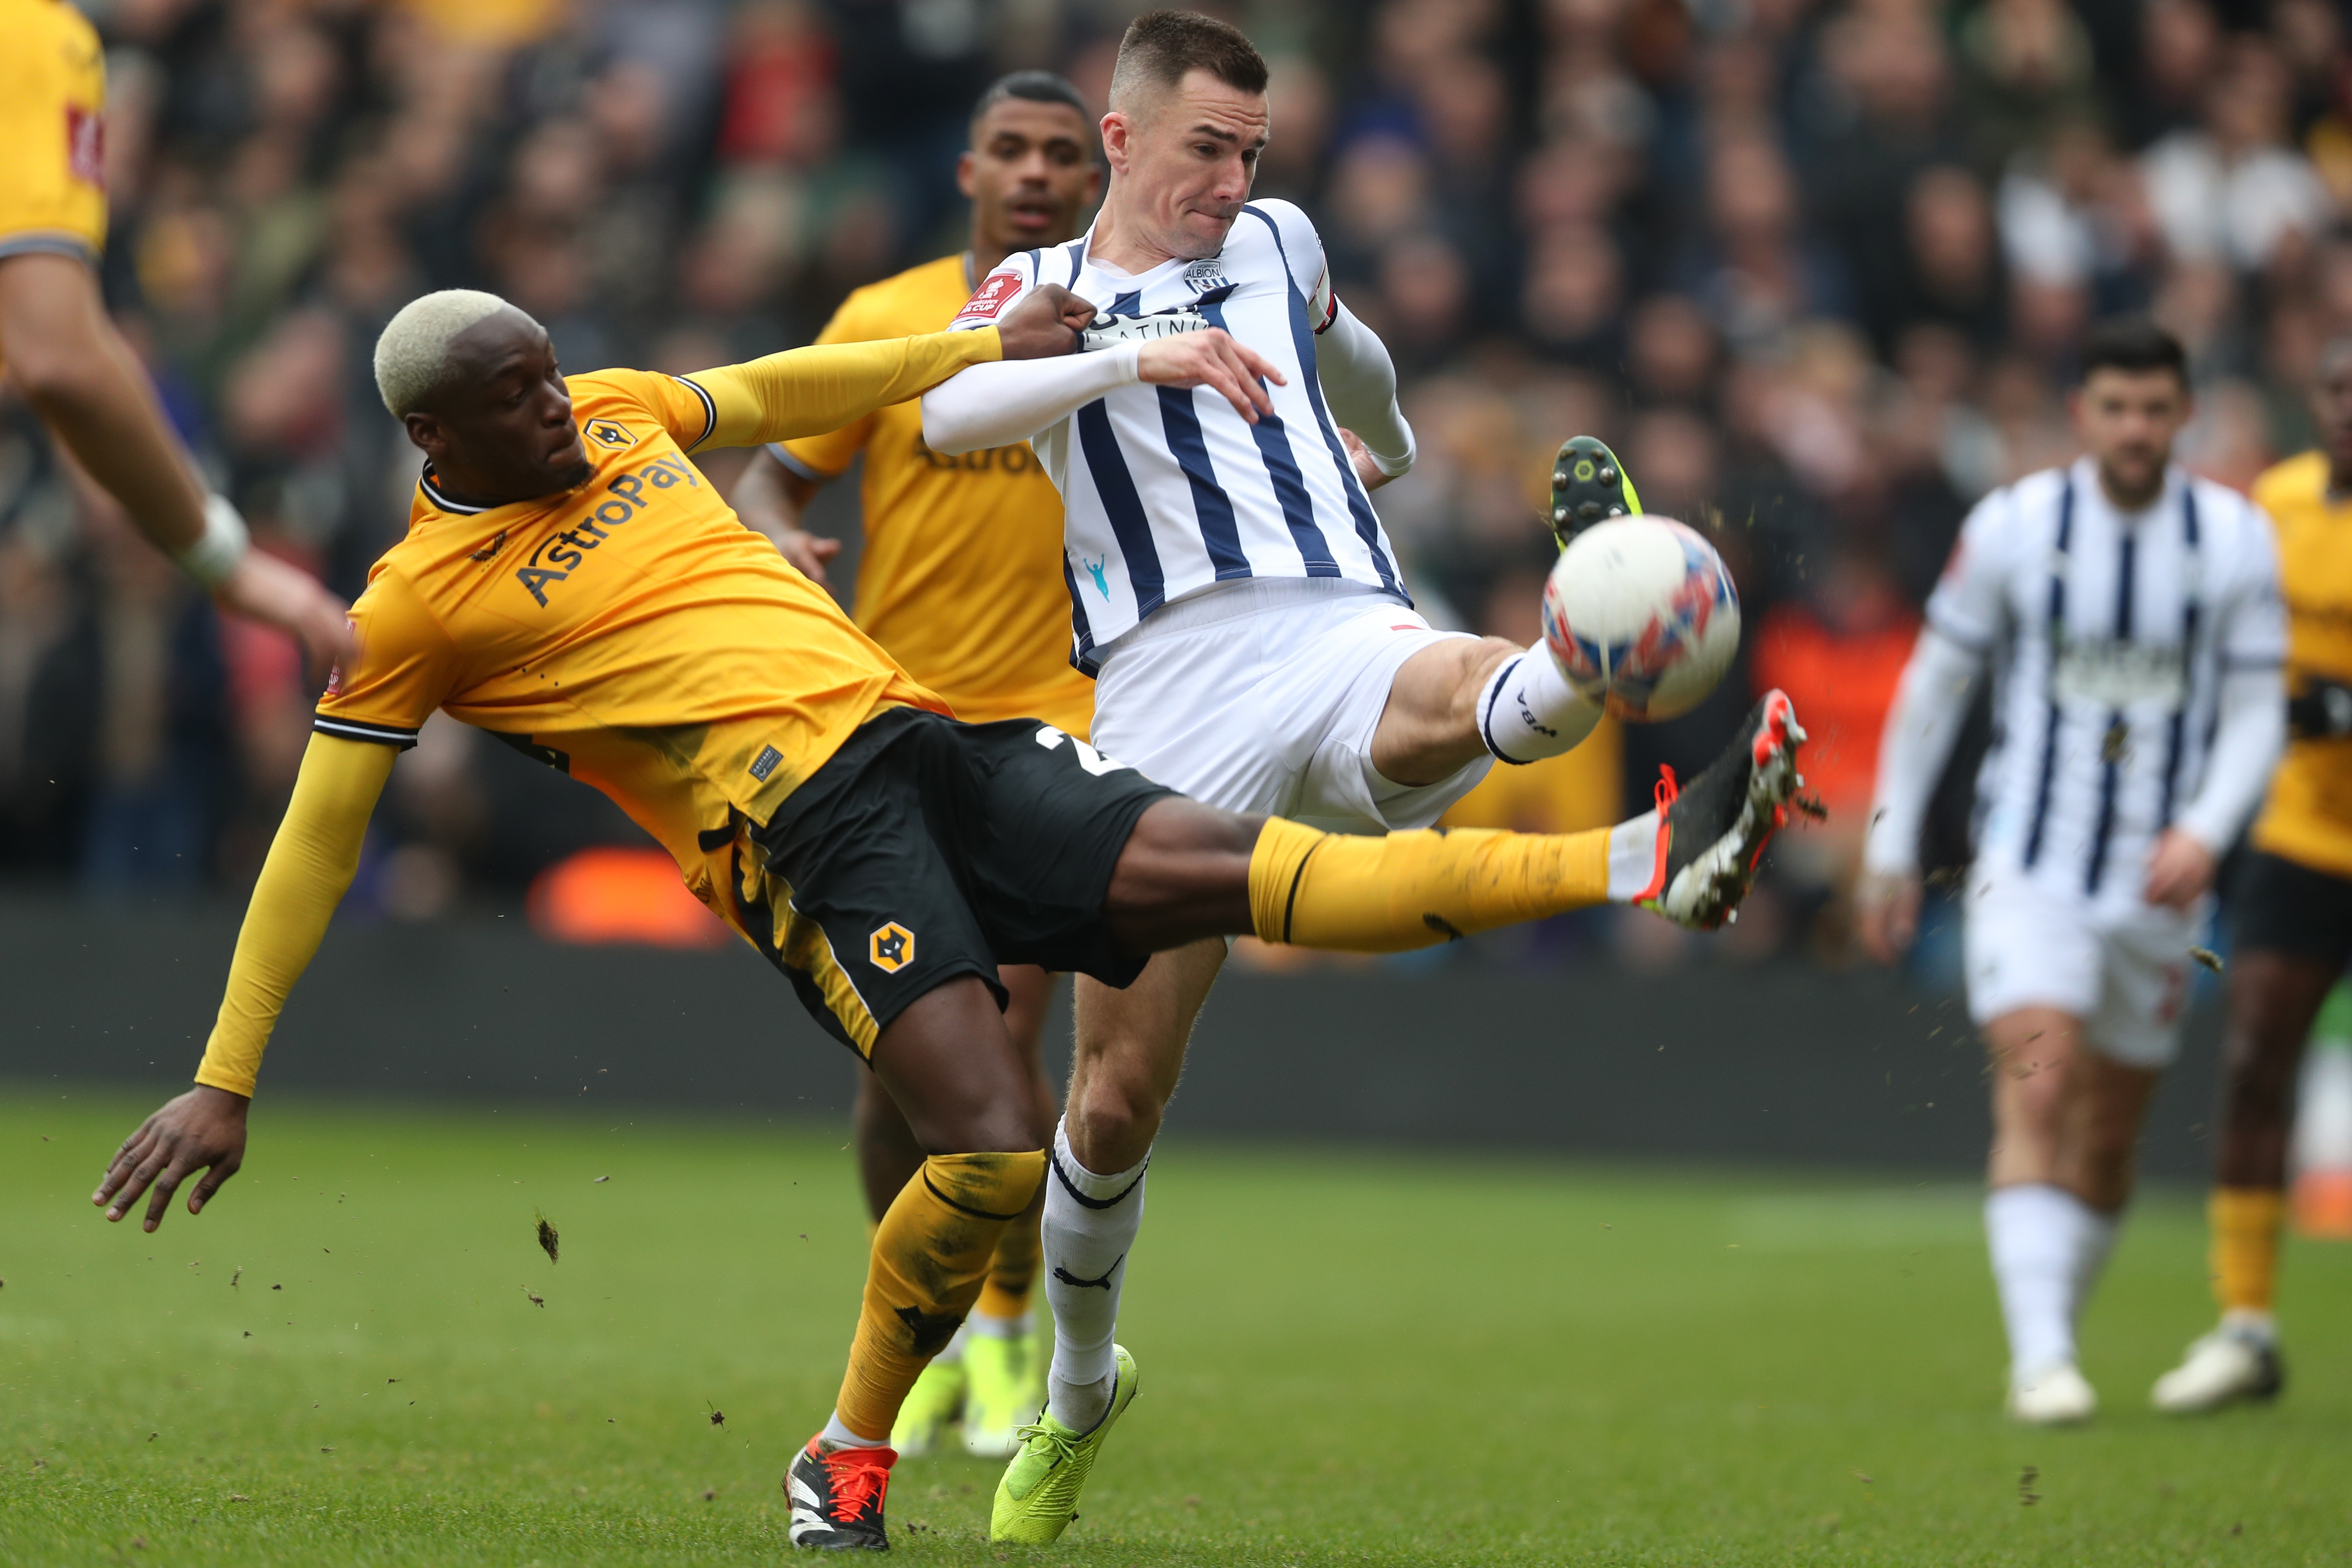 Jed Wallace fights for the ball against Wolves